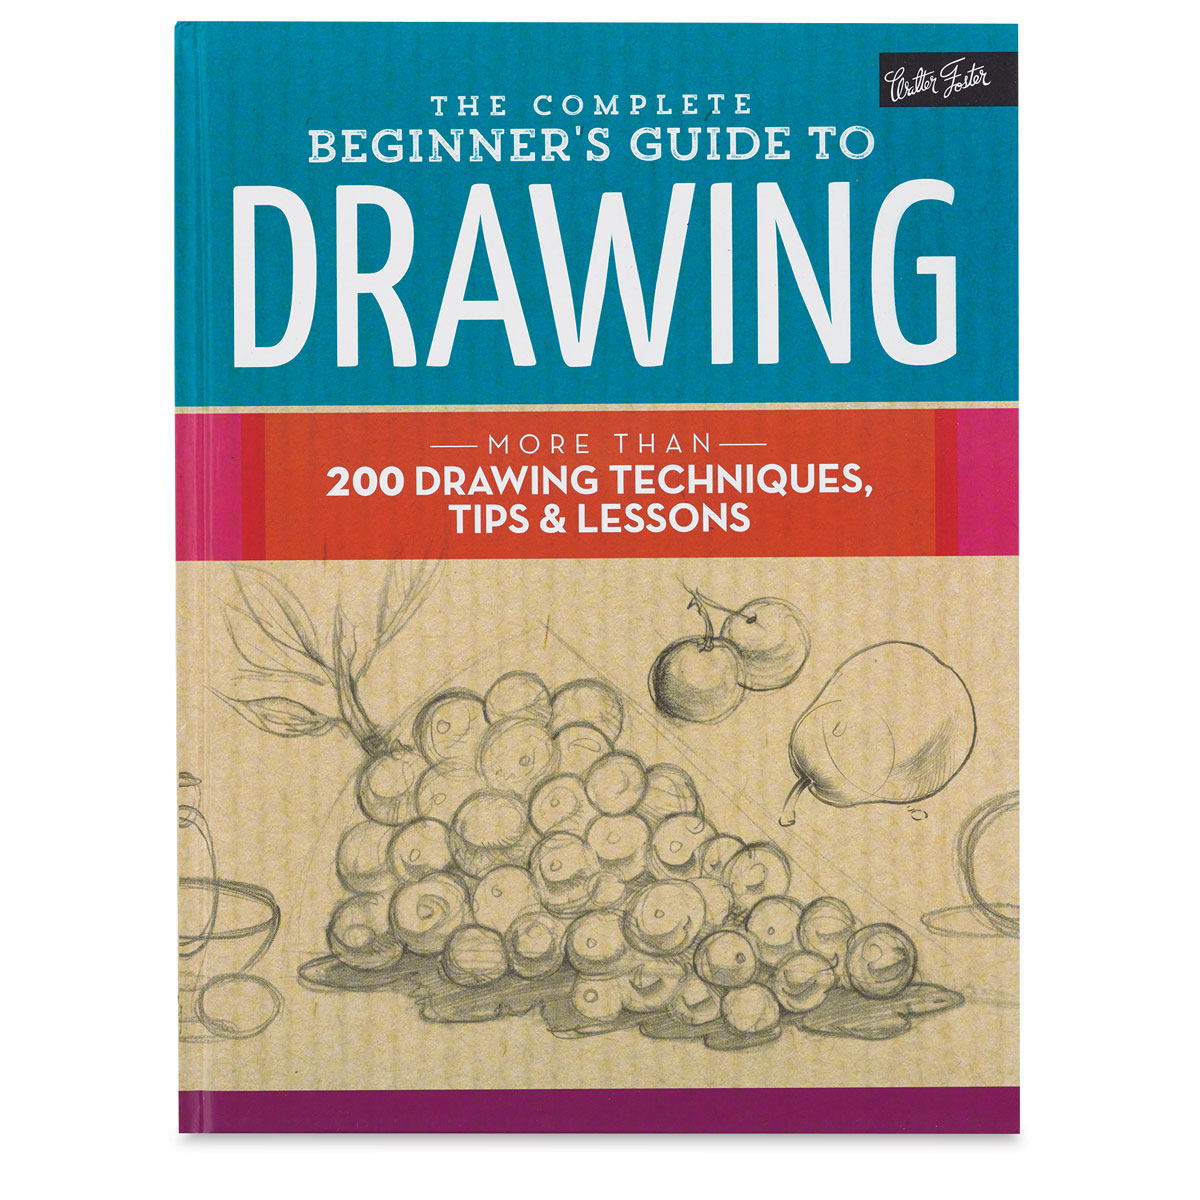 Artistro's Guide for Drawing Practice for Beginners, including